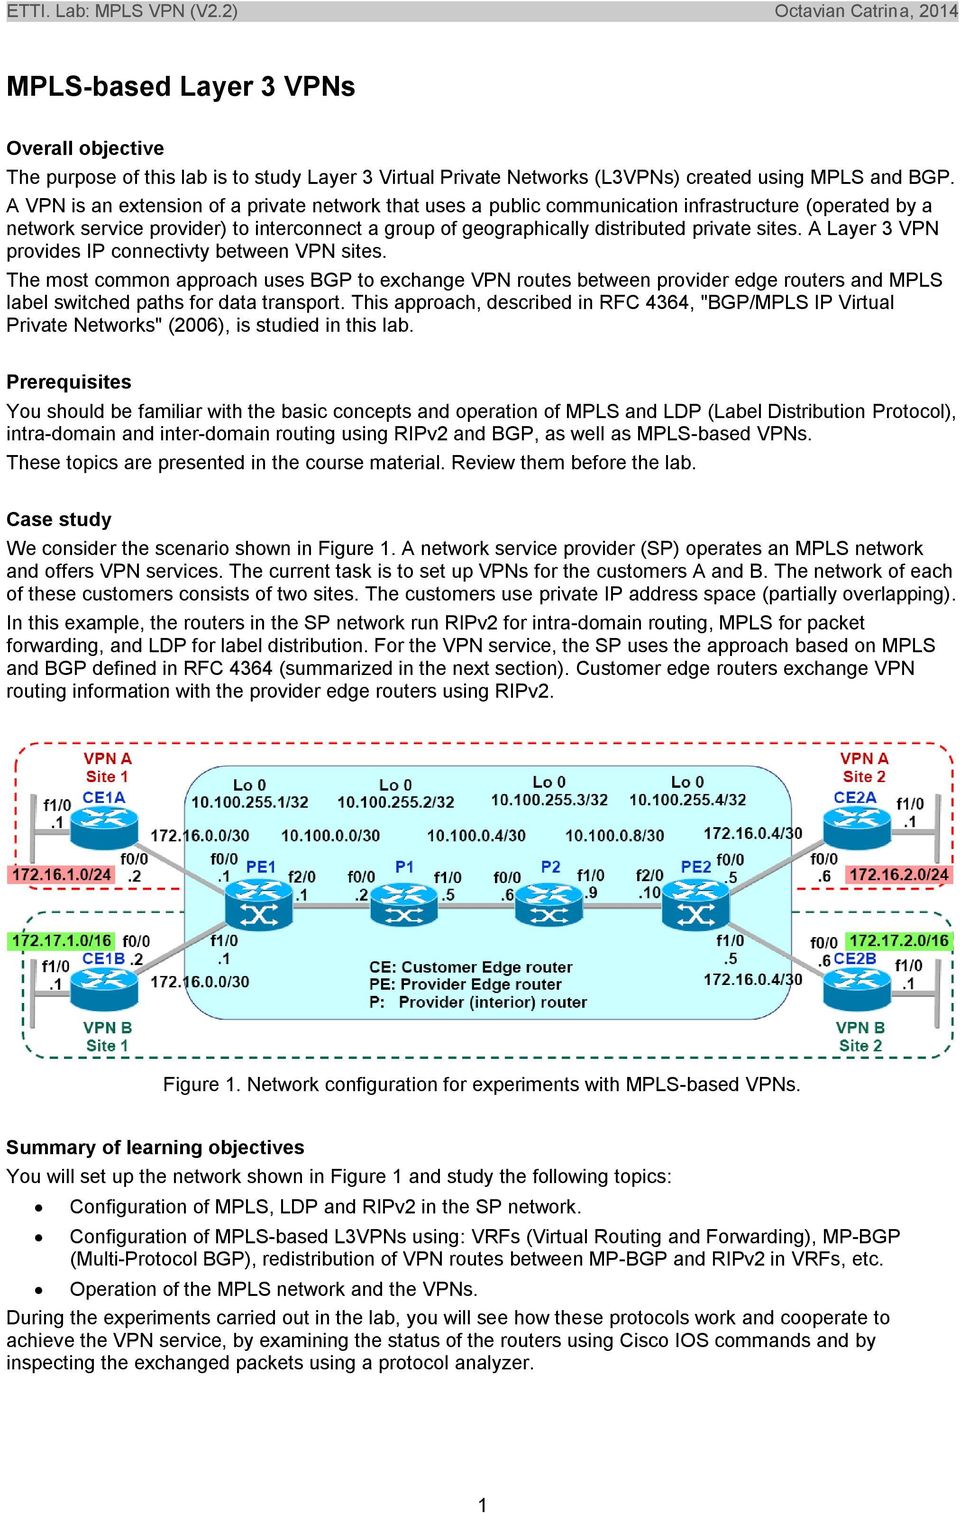 A Layer 3 VPN provides IP connectivty between VPN sites. The most common approach uses BGP to exchange VPN routes between provider edge routers and MPLS label switched paths for data transport.